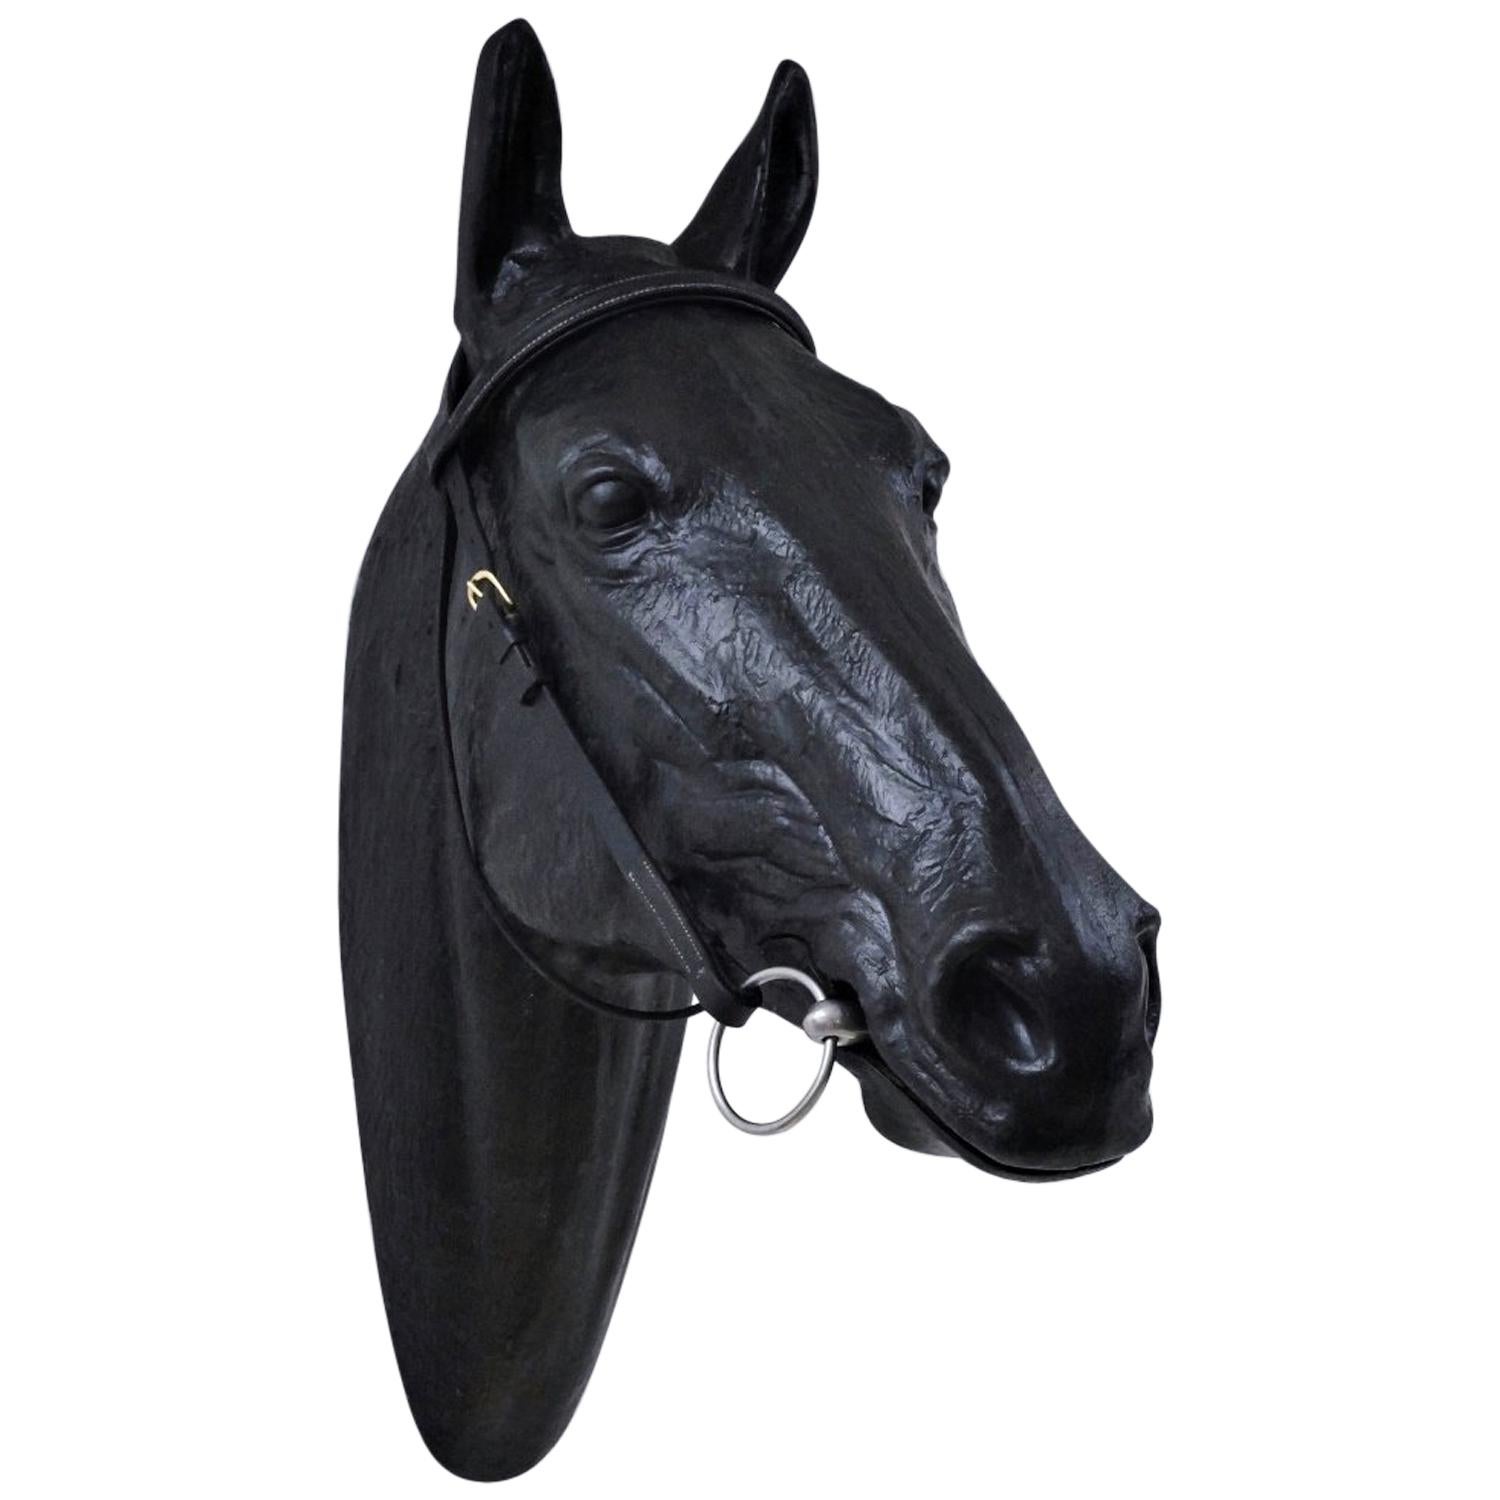 Sculpture Horse Head Life-Sized Shop Display for Leather Bridle, 1970s, English For Sale